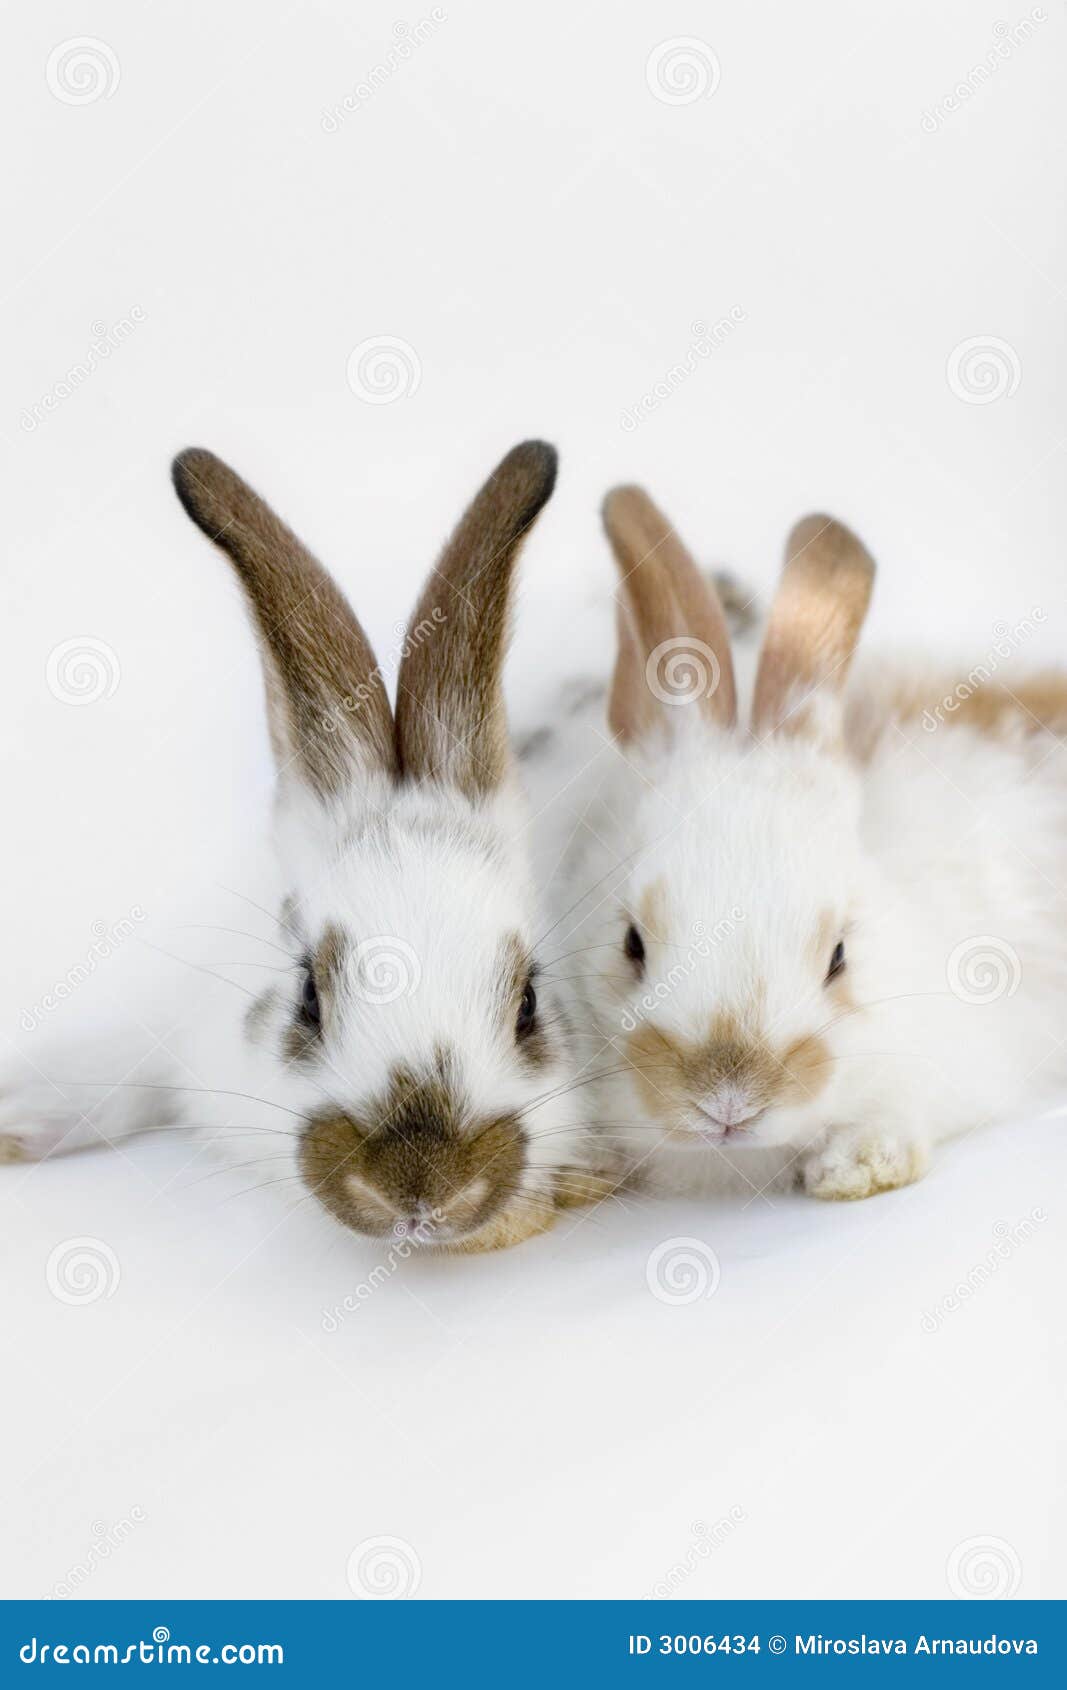 Little Sweet Rabbits Stock Images - Image: 3006434